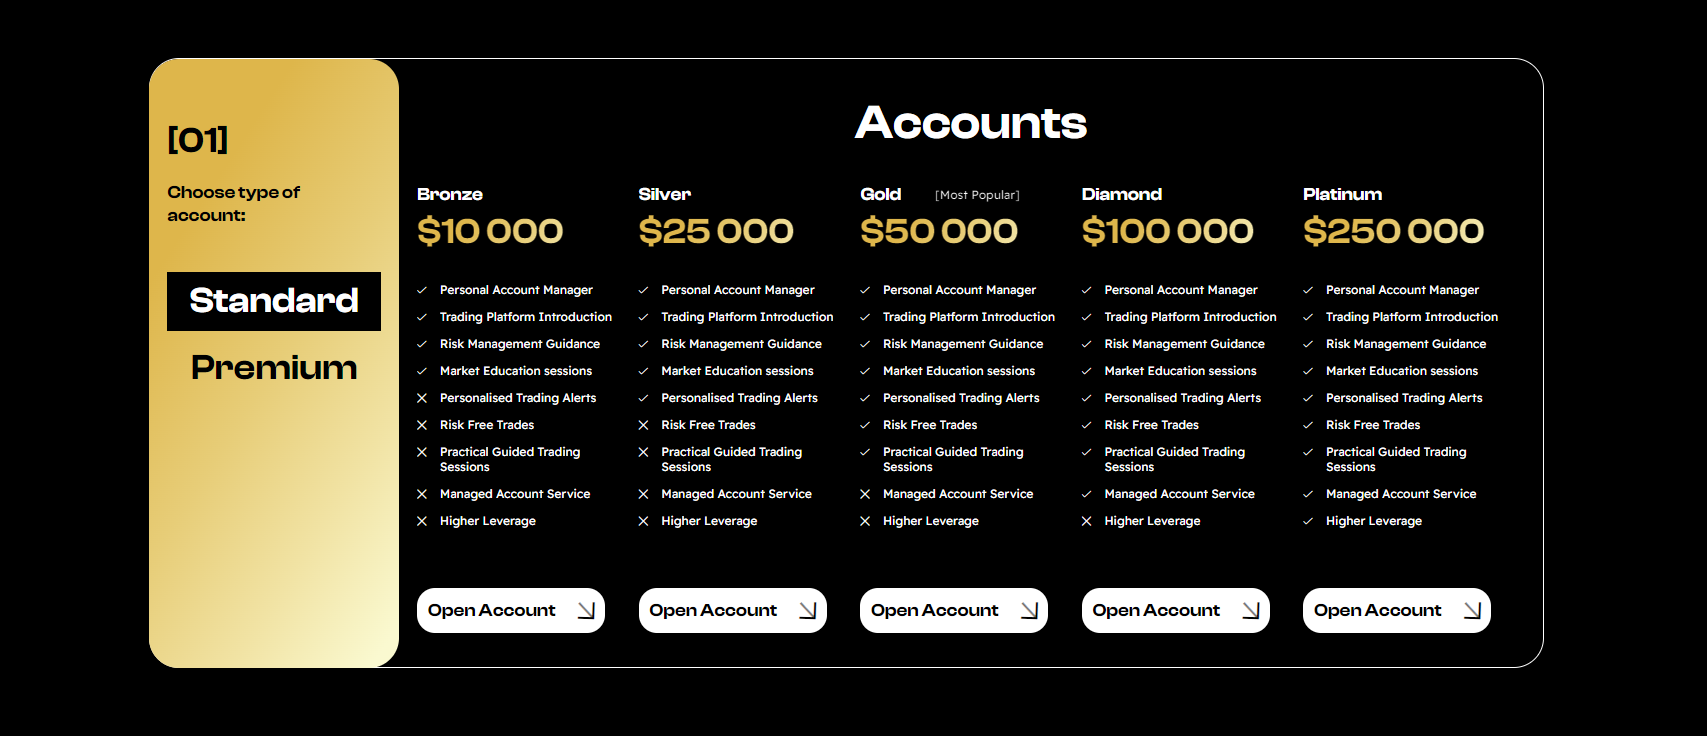 Overview of accounts at Empowerways.com